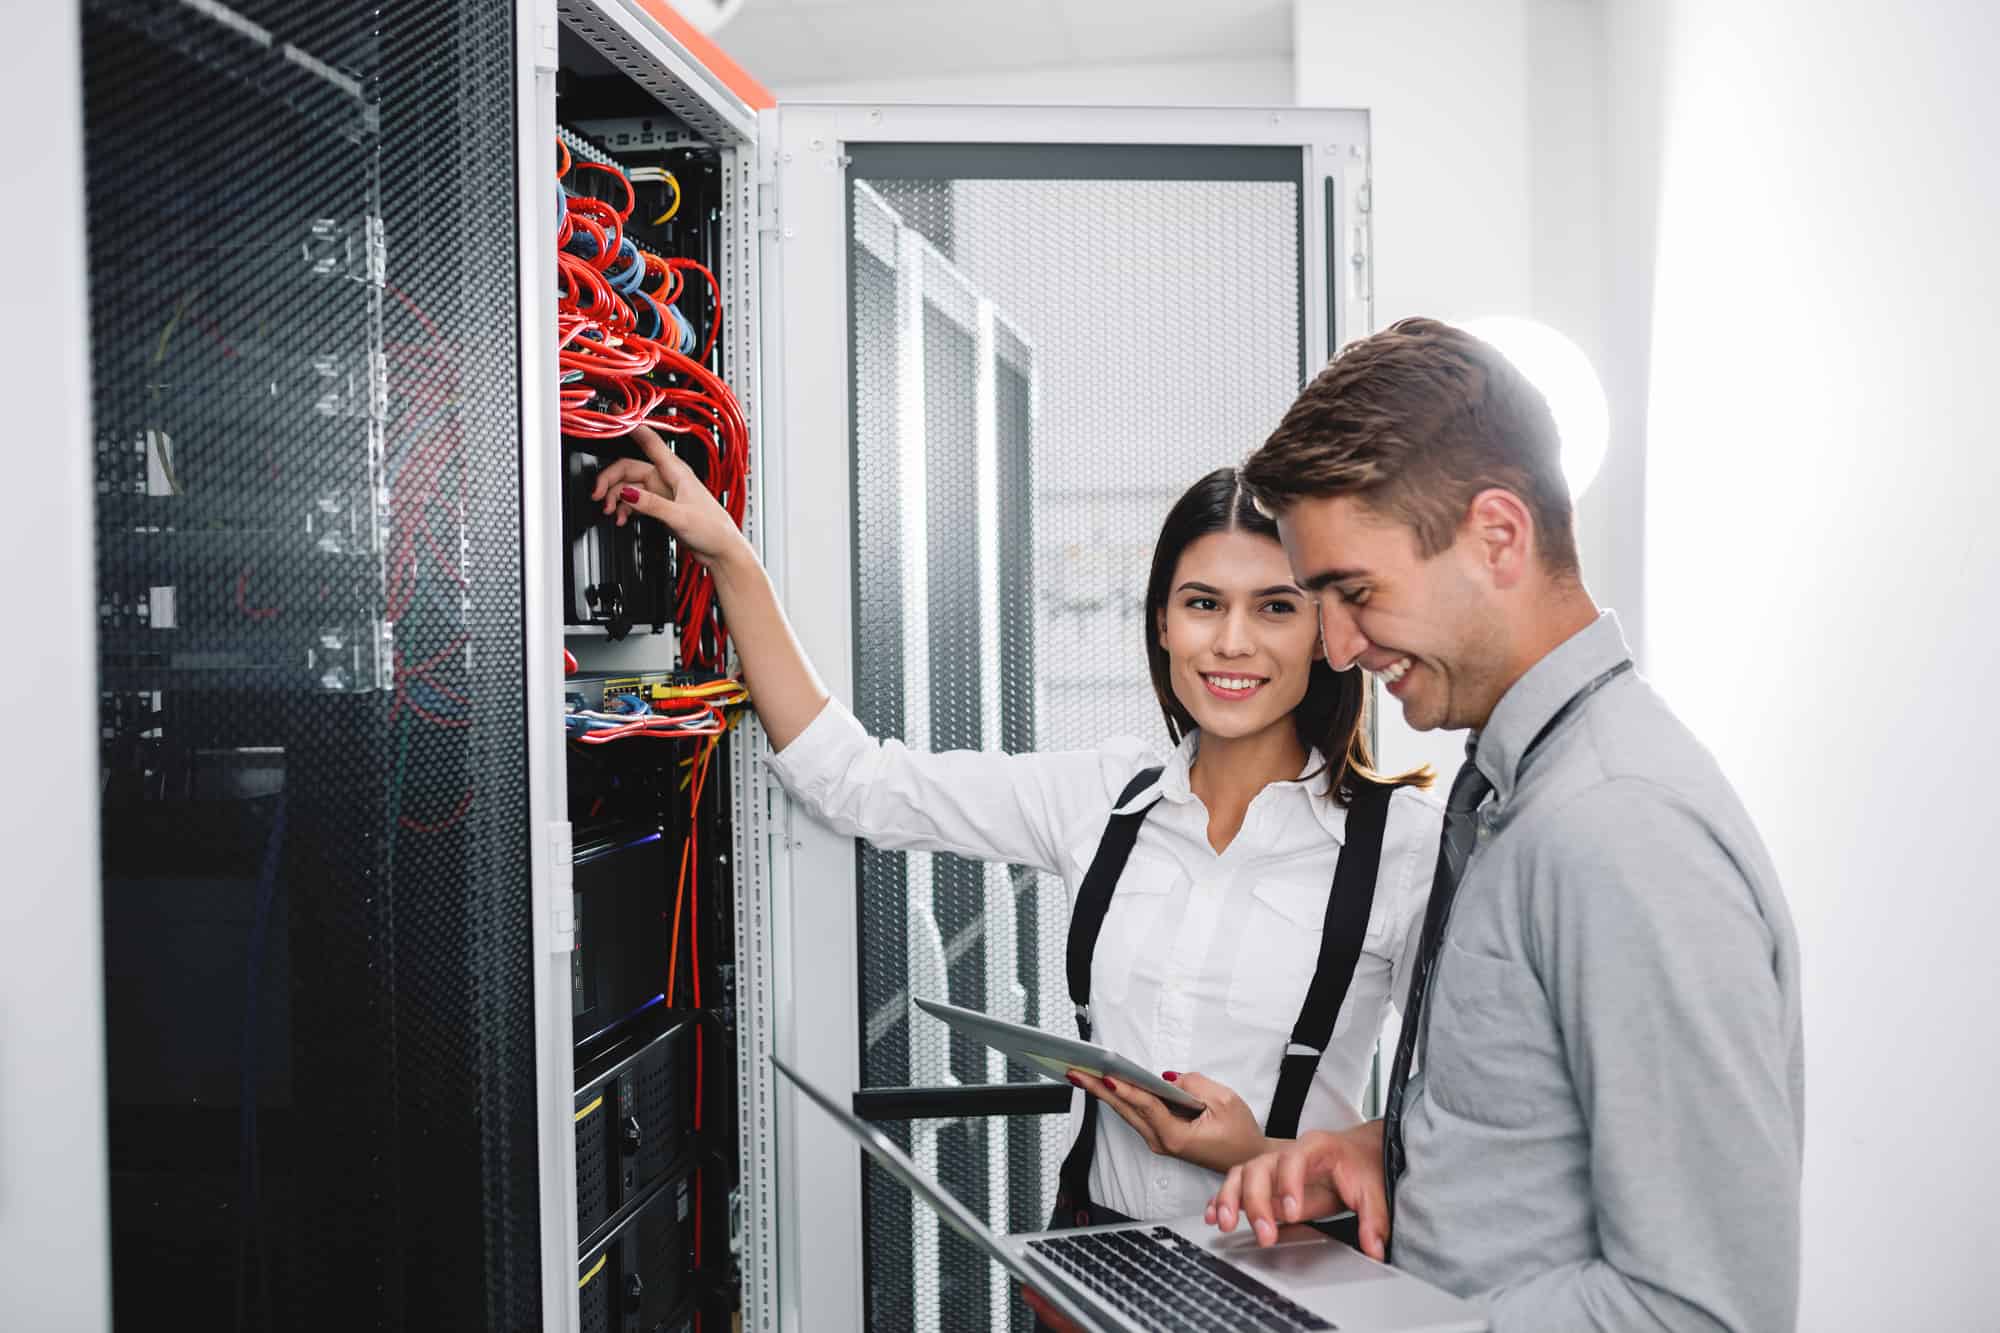 Two young people in server room